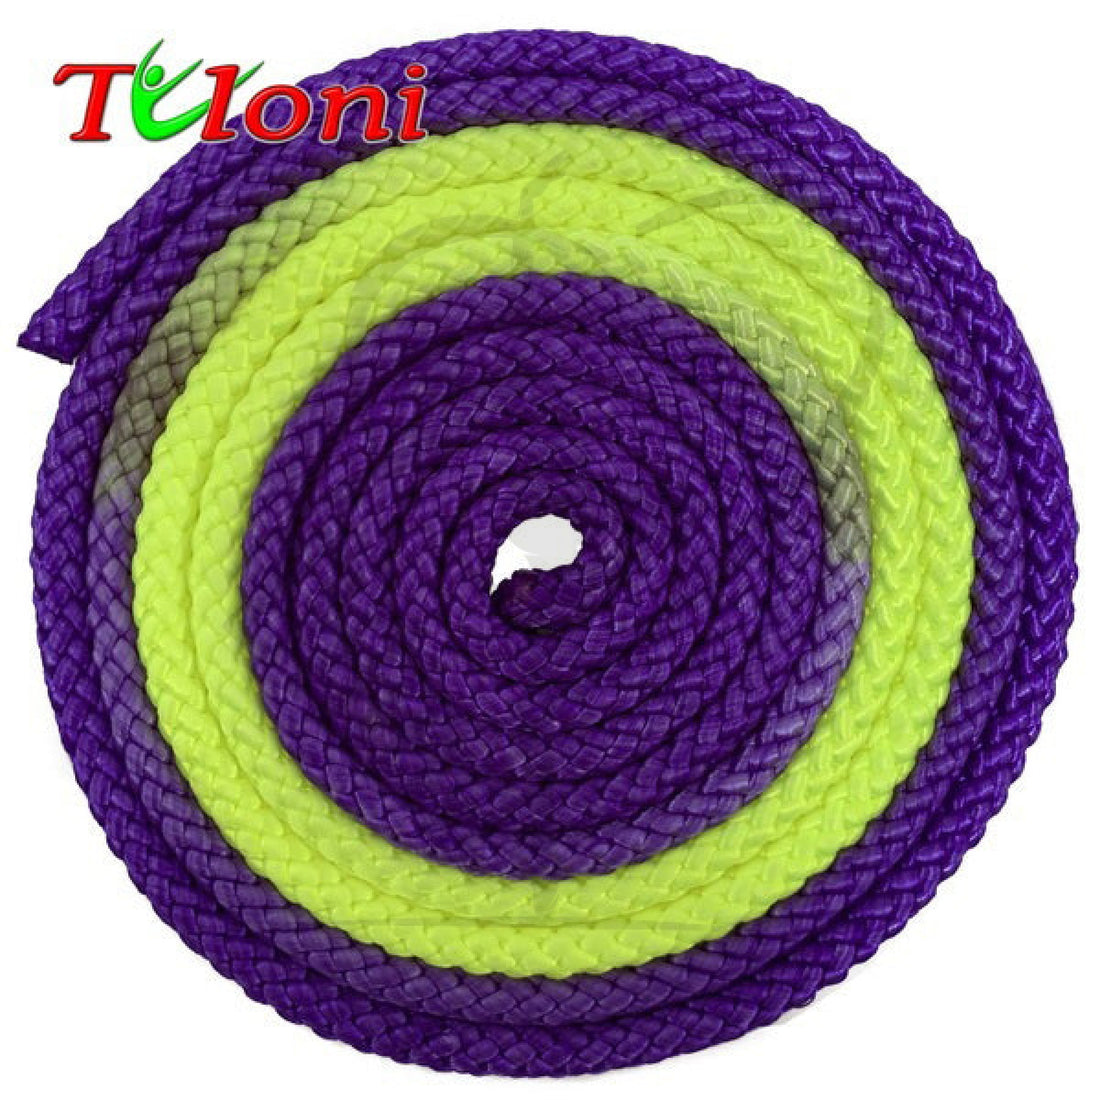 Tuloni Multicolour Rope 3M Violet X Yellow Ropes